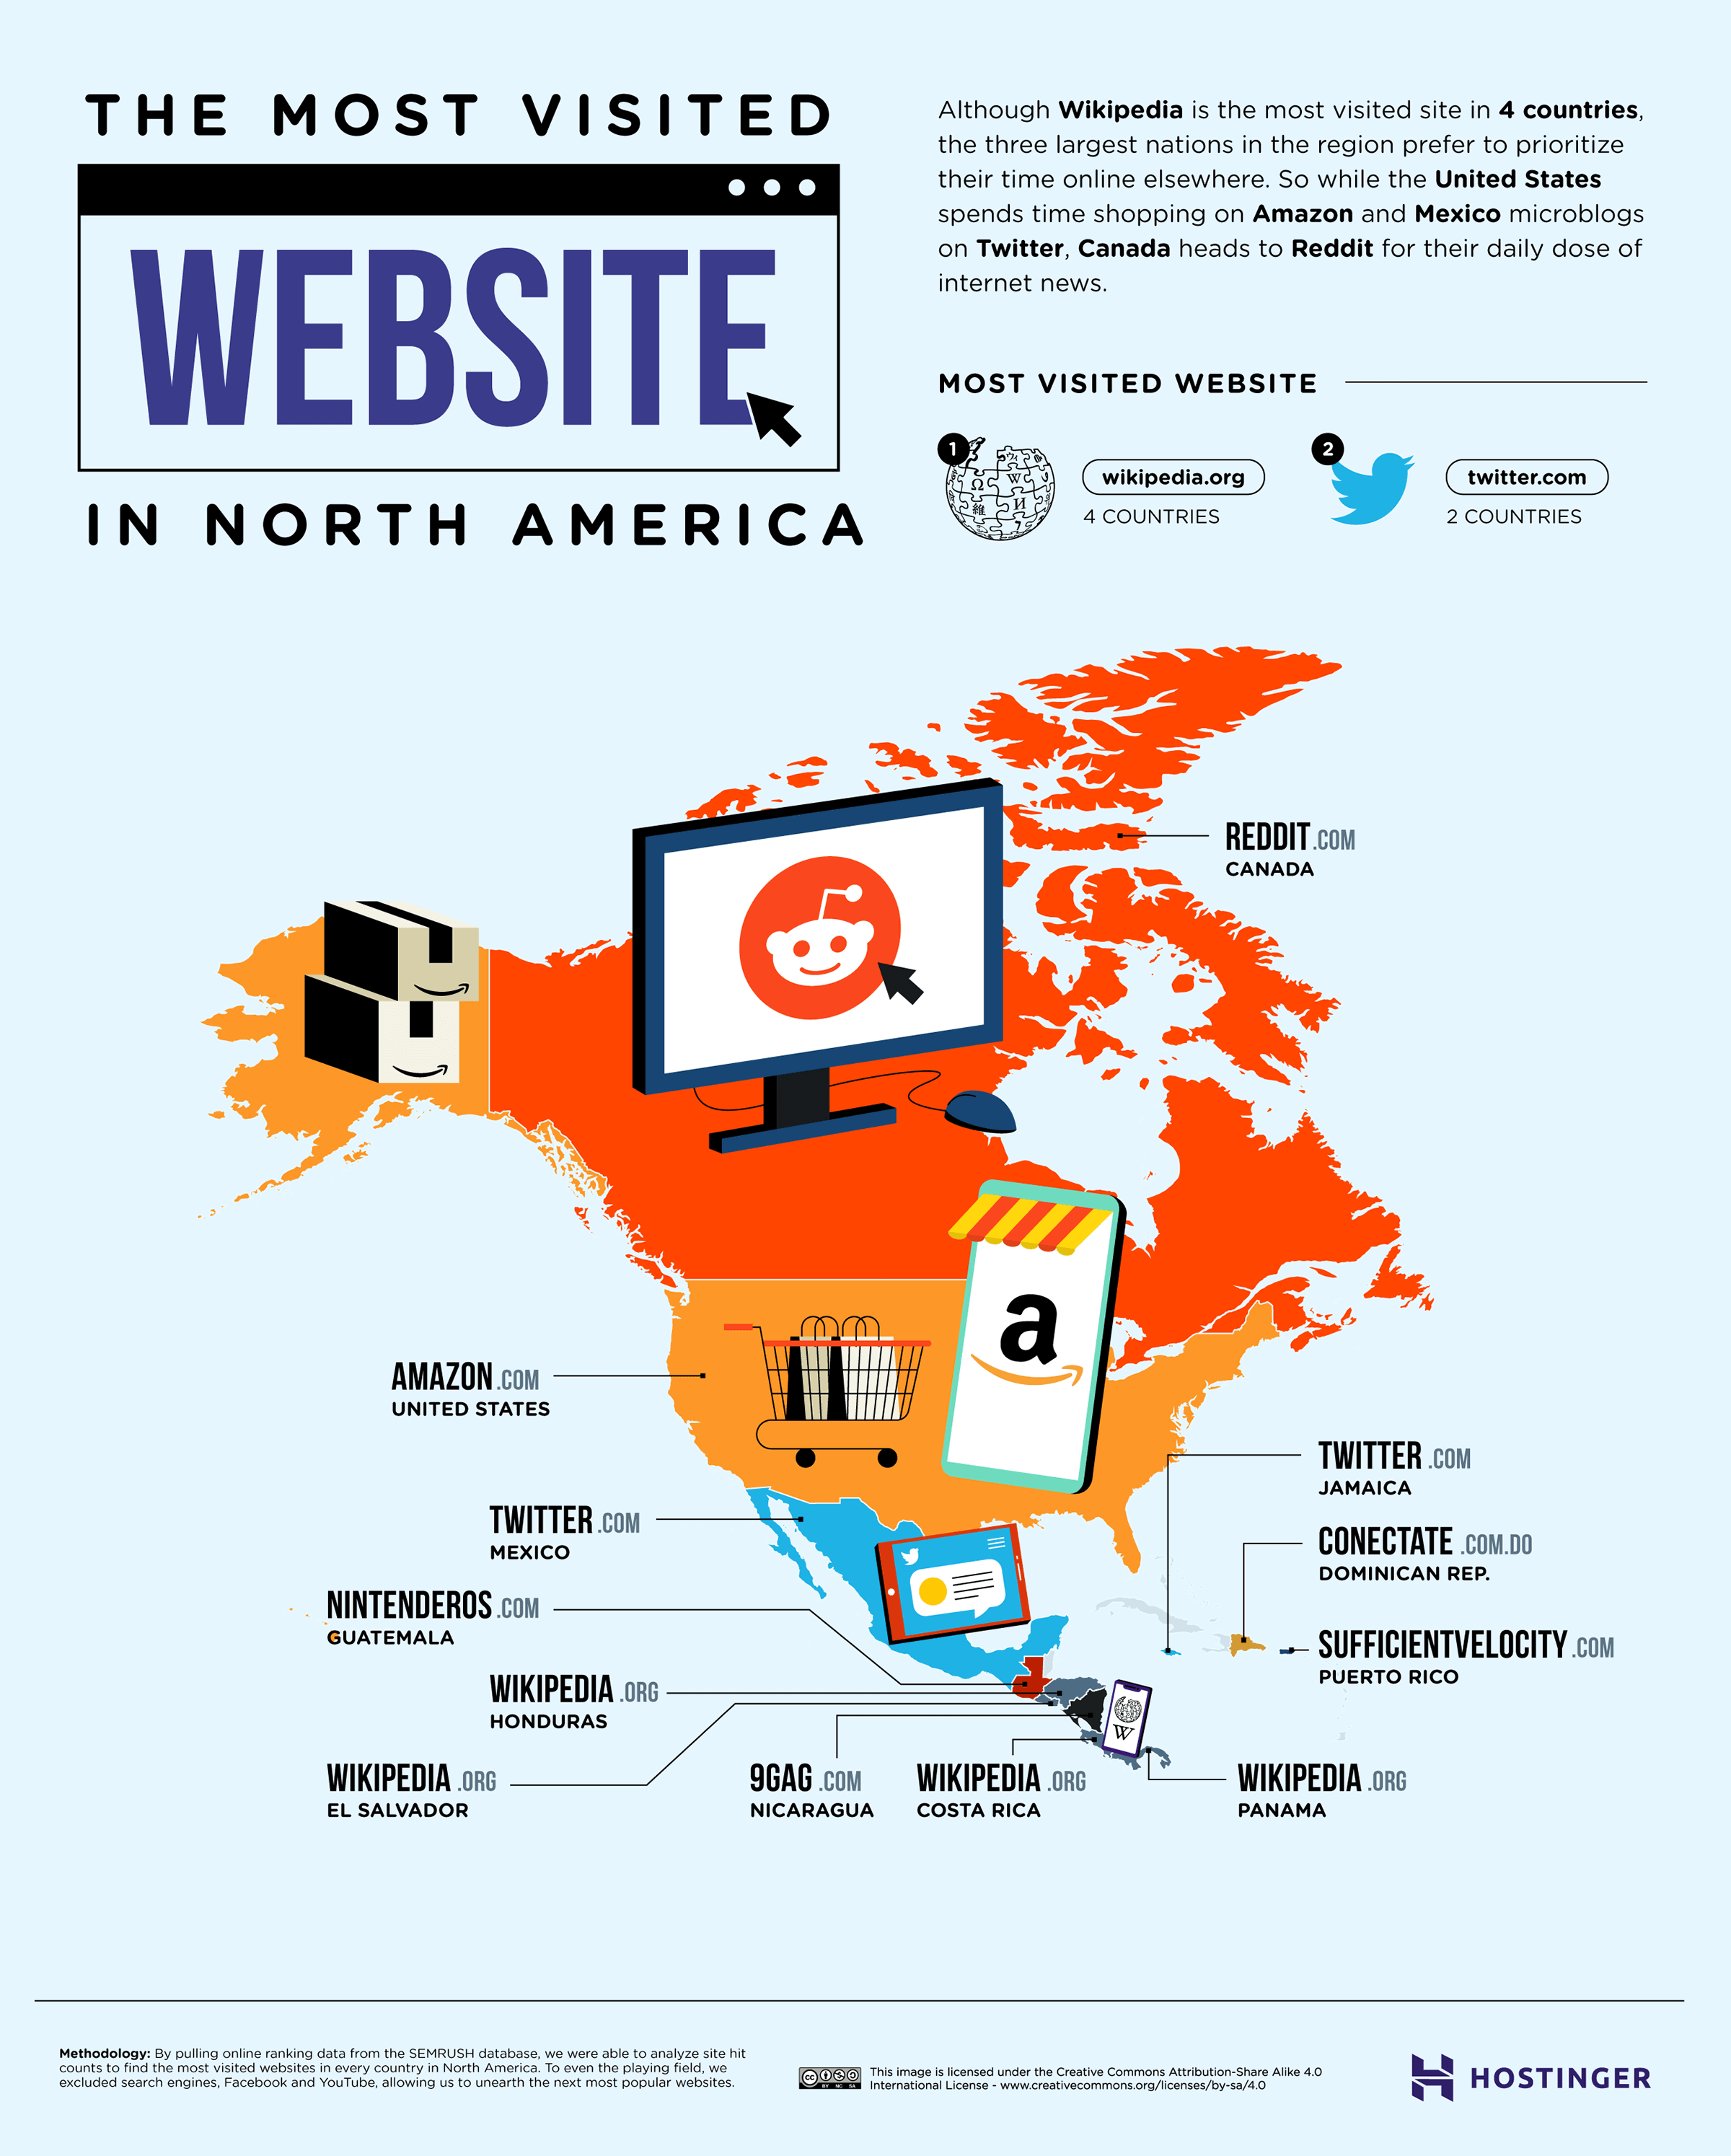 02_The-Most-Visited-Website-in-Every-Country_North-America_Hi-RES-1.png